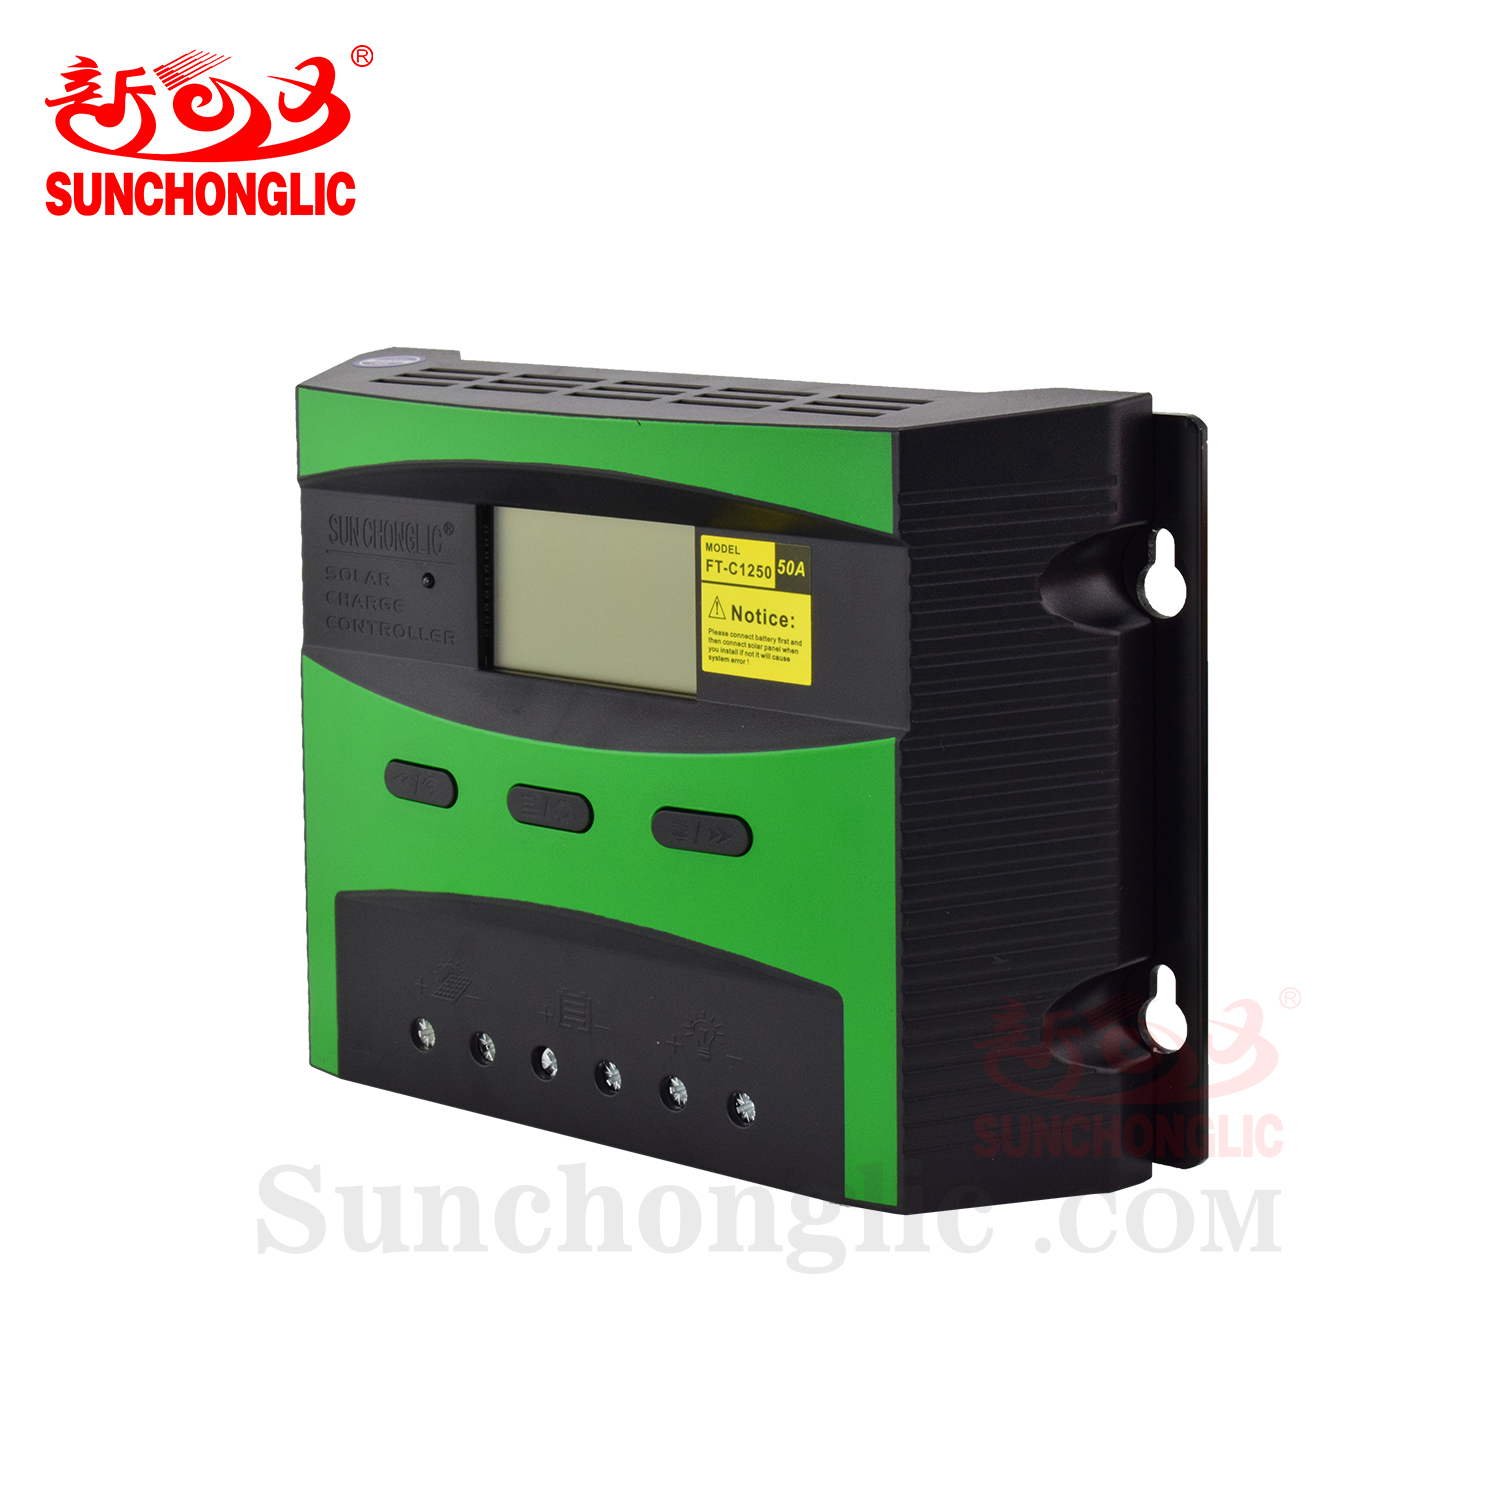 Solar Charge Controller -  FT-C1250